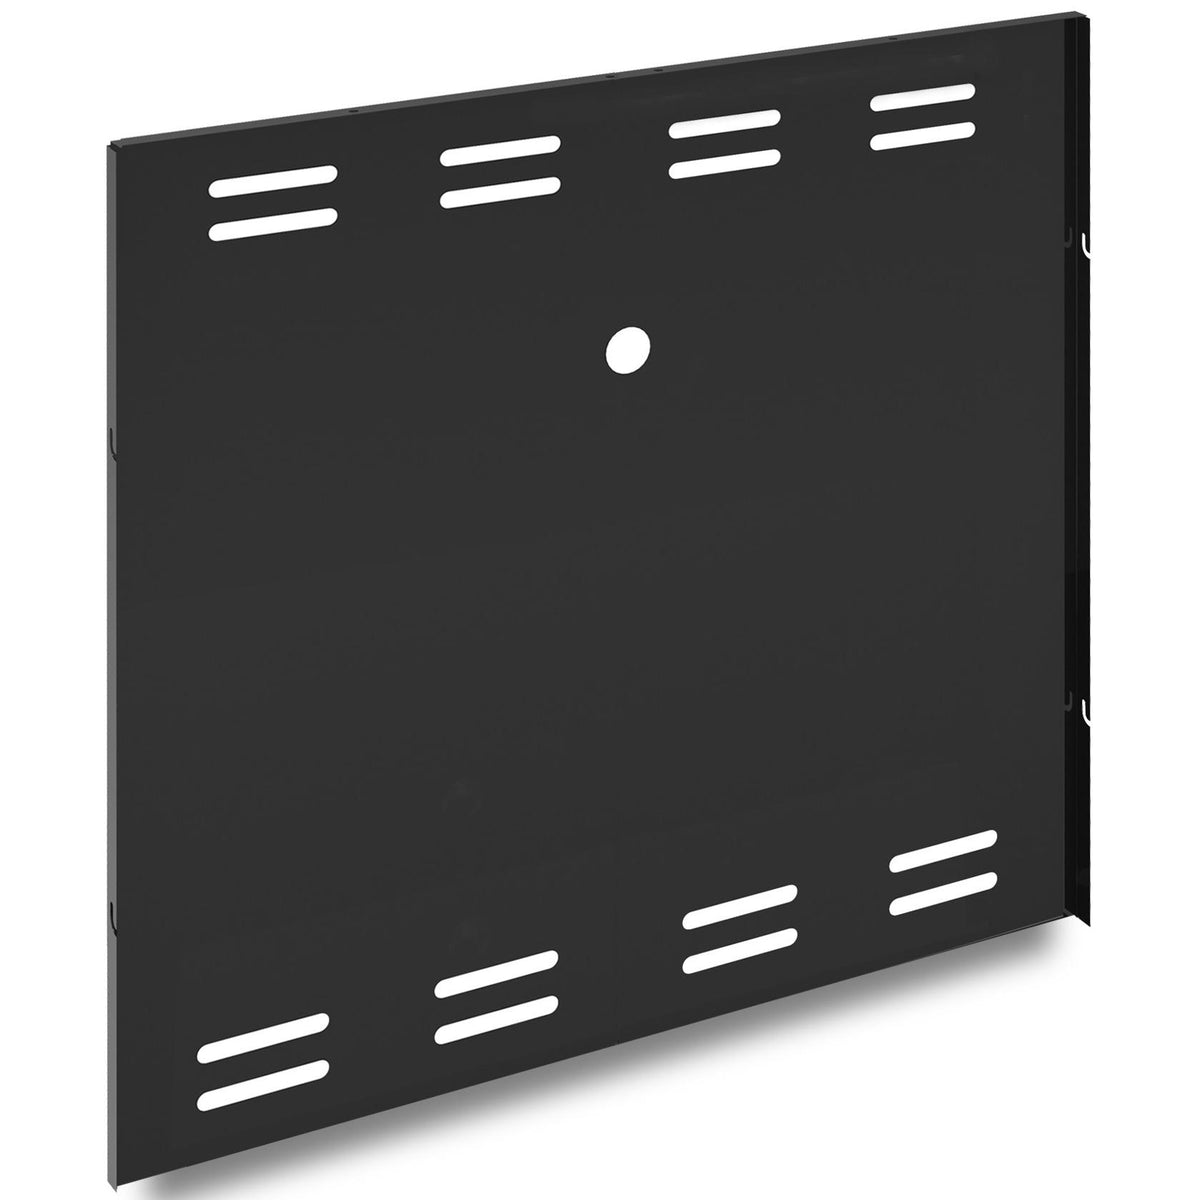 Broil King Refrigeration Accessories Panels 900300 IMAGE 1